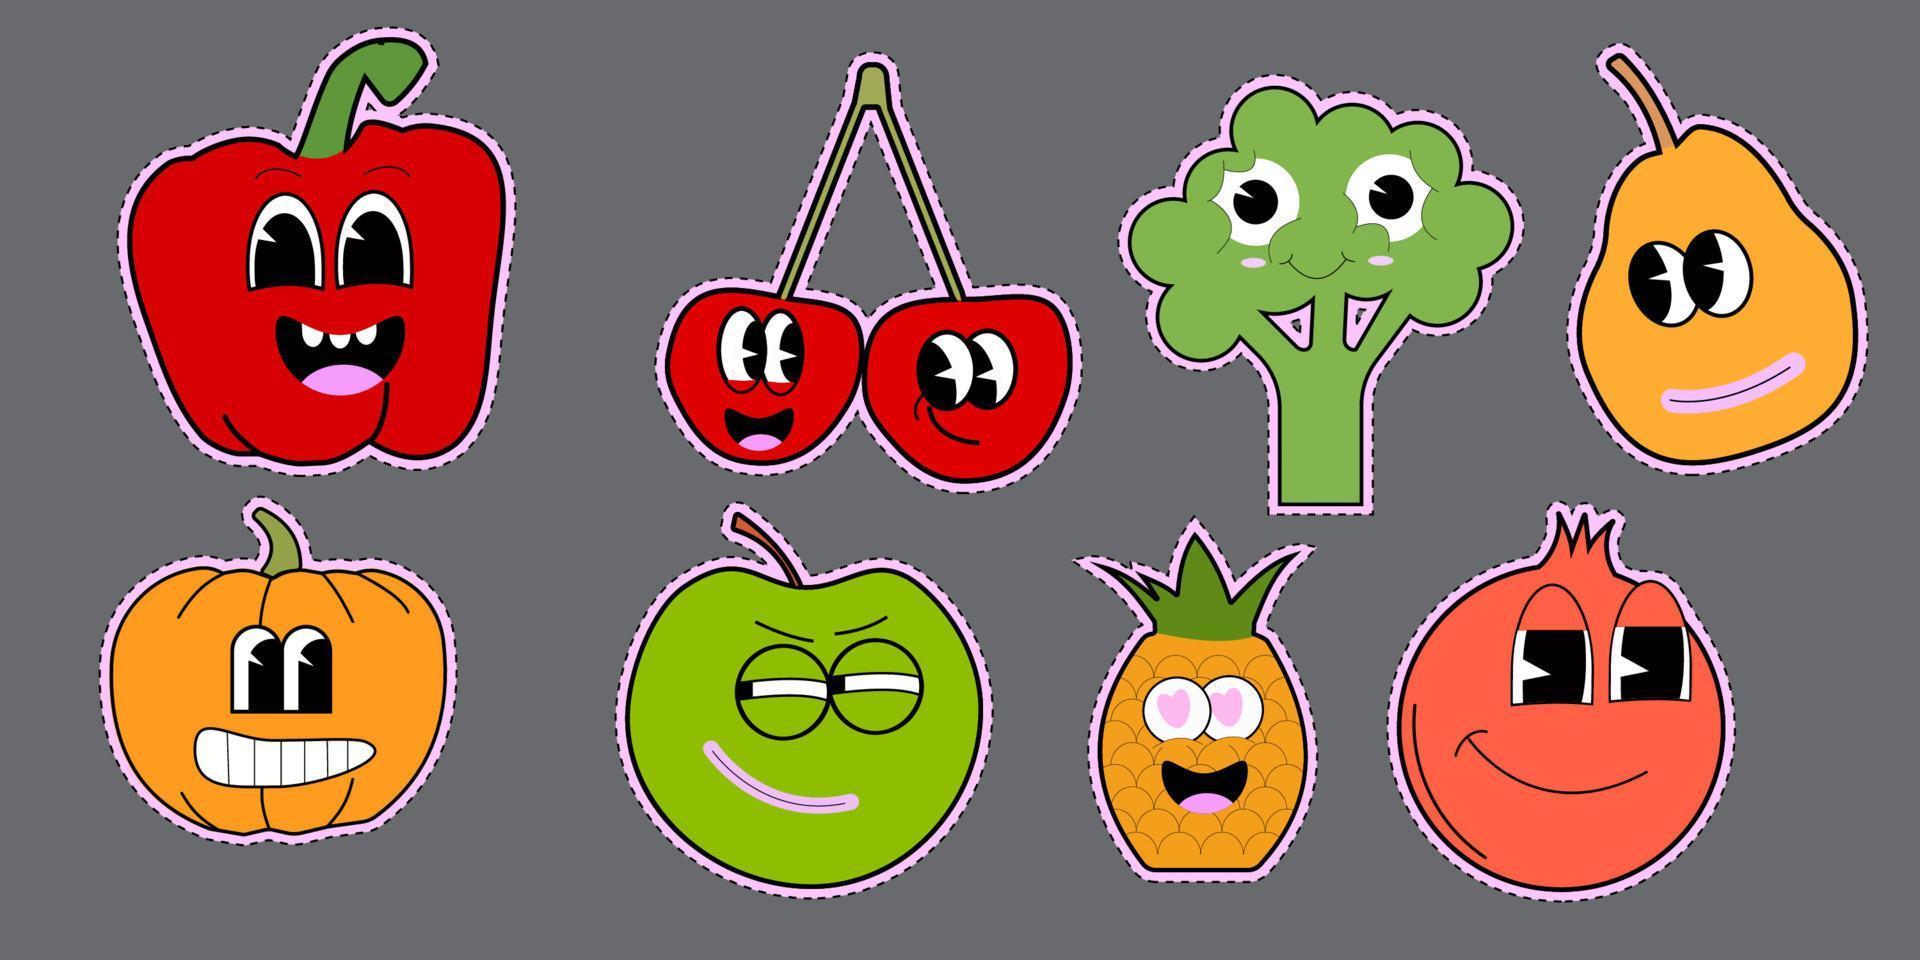 Set of funny vegetable and fruit emoji stickers vector